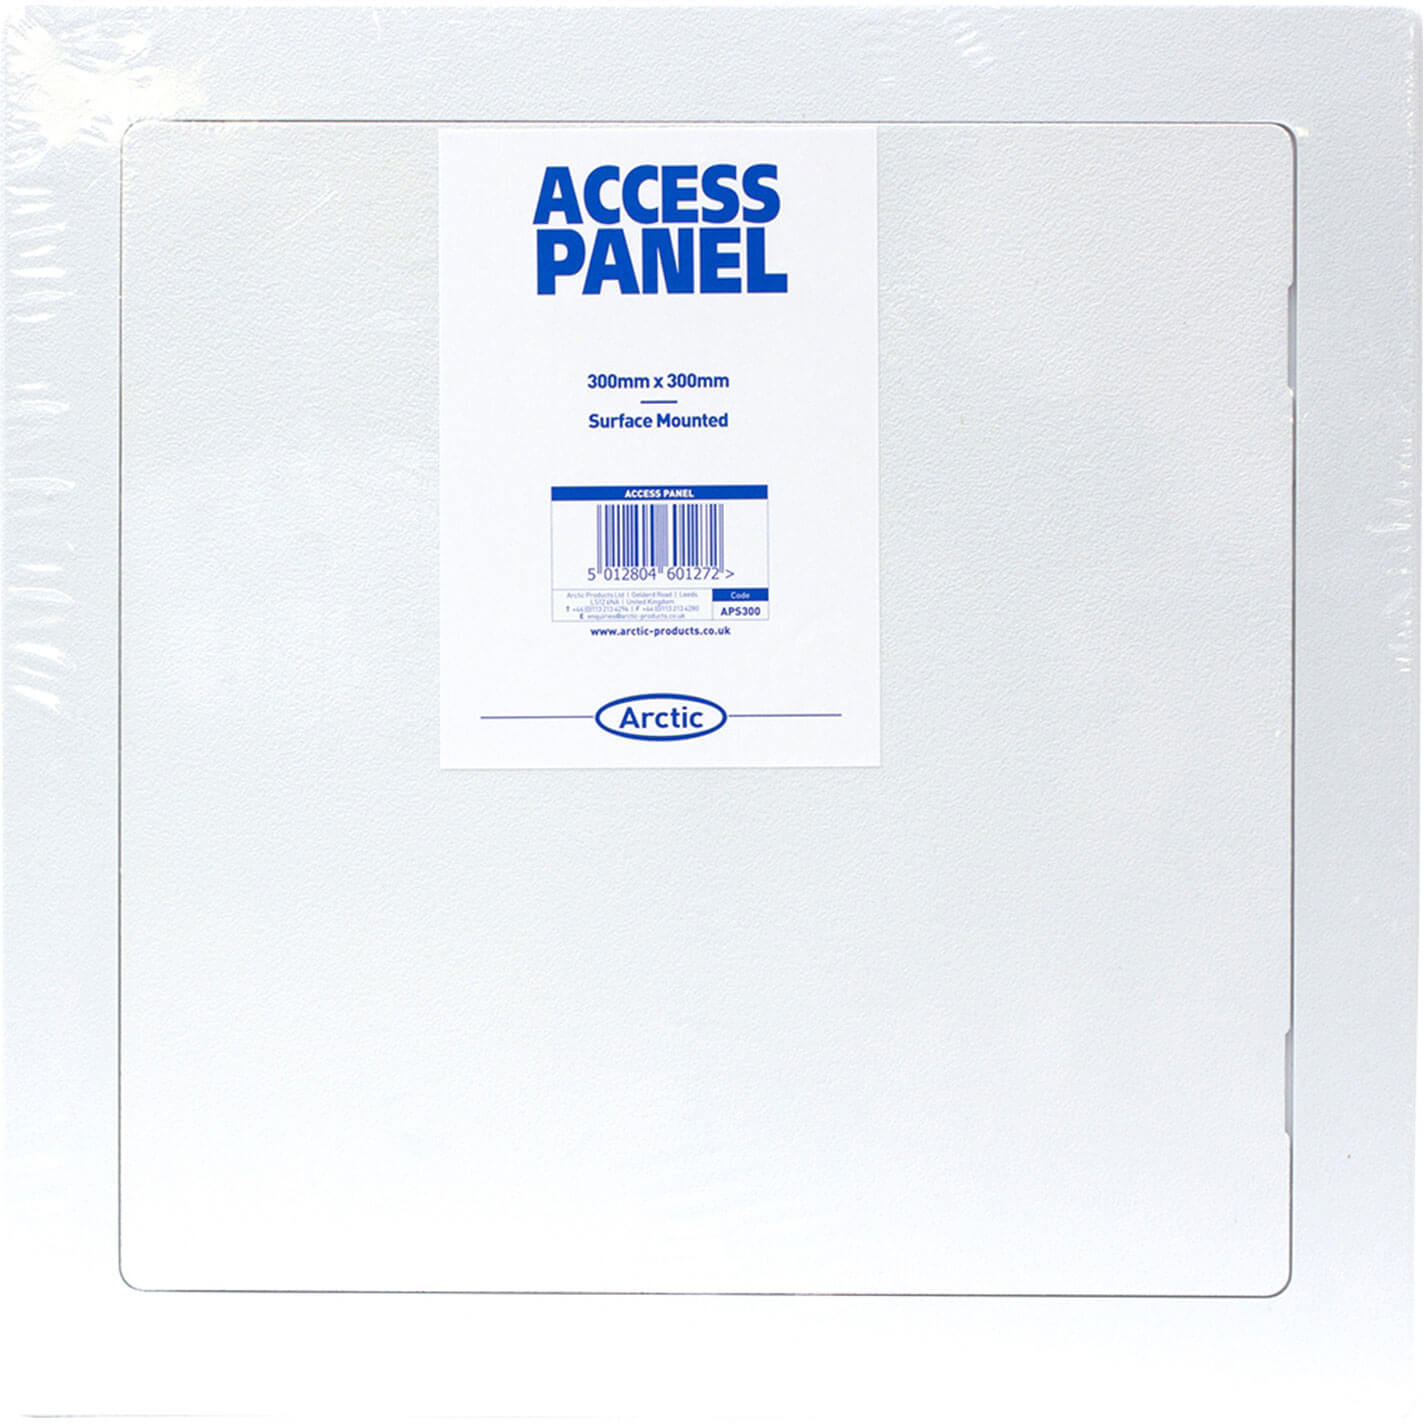 Image of Arctic Hayes Access Panel 300mm 300mm